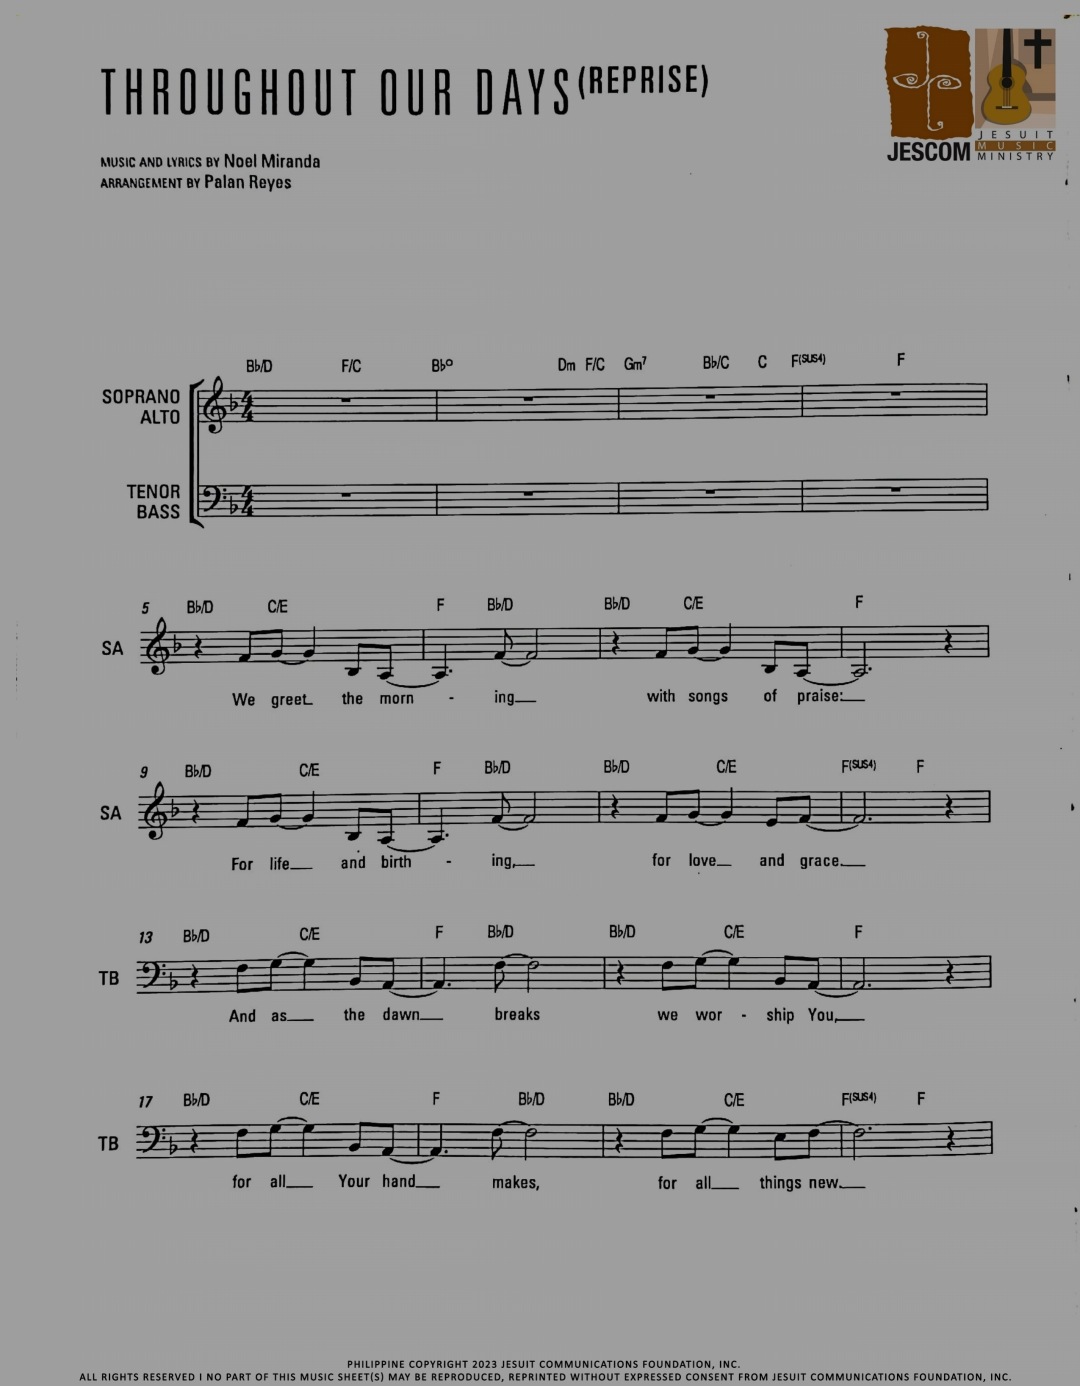 THROUGHOUT OUR DAYS (REPRISE) – Music Sheet